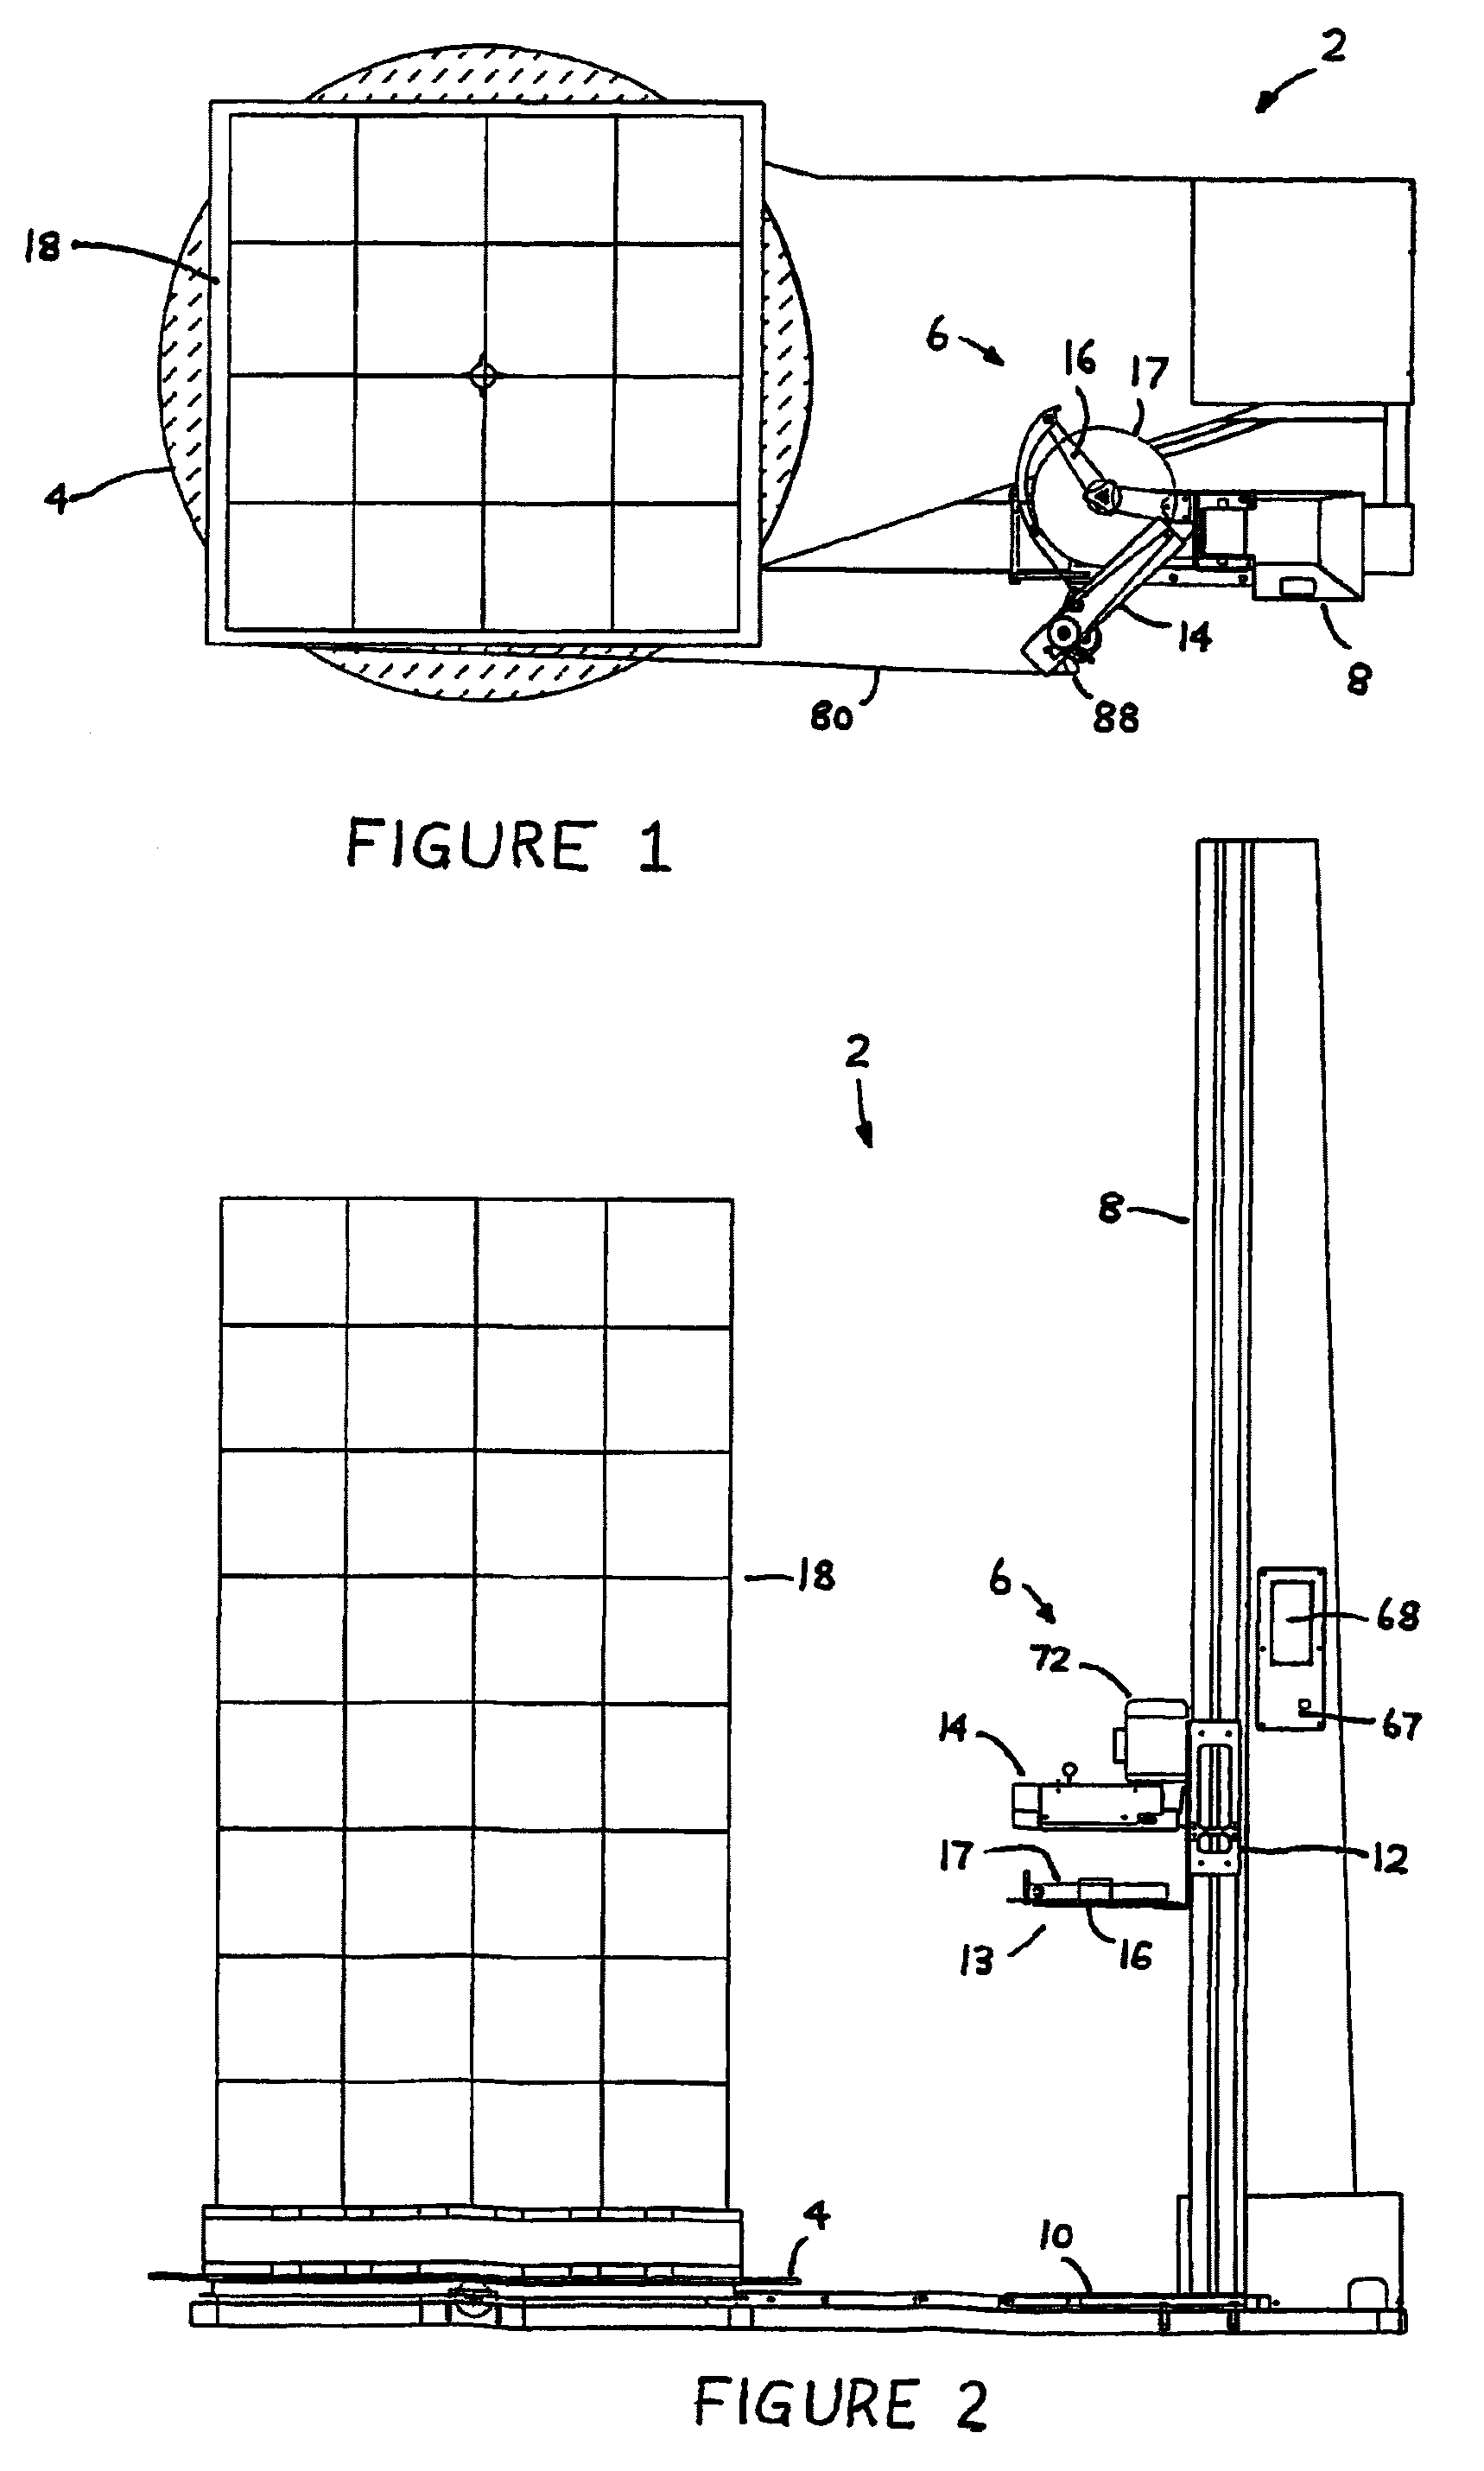 Method and apparatus for wrapping a load